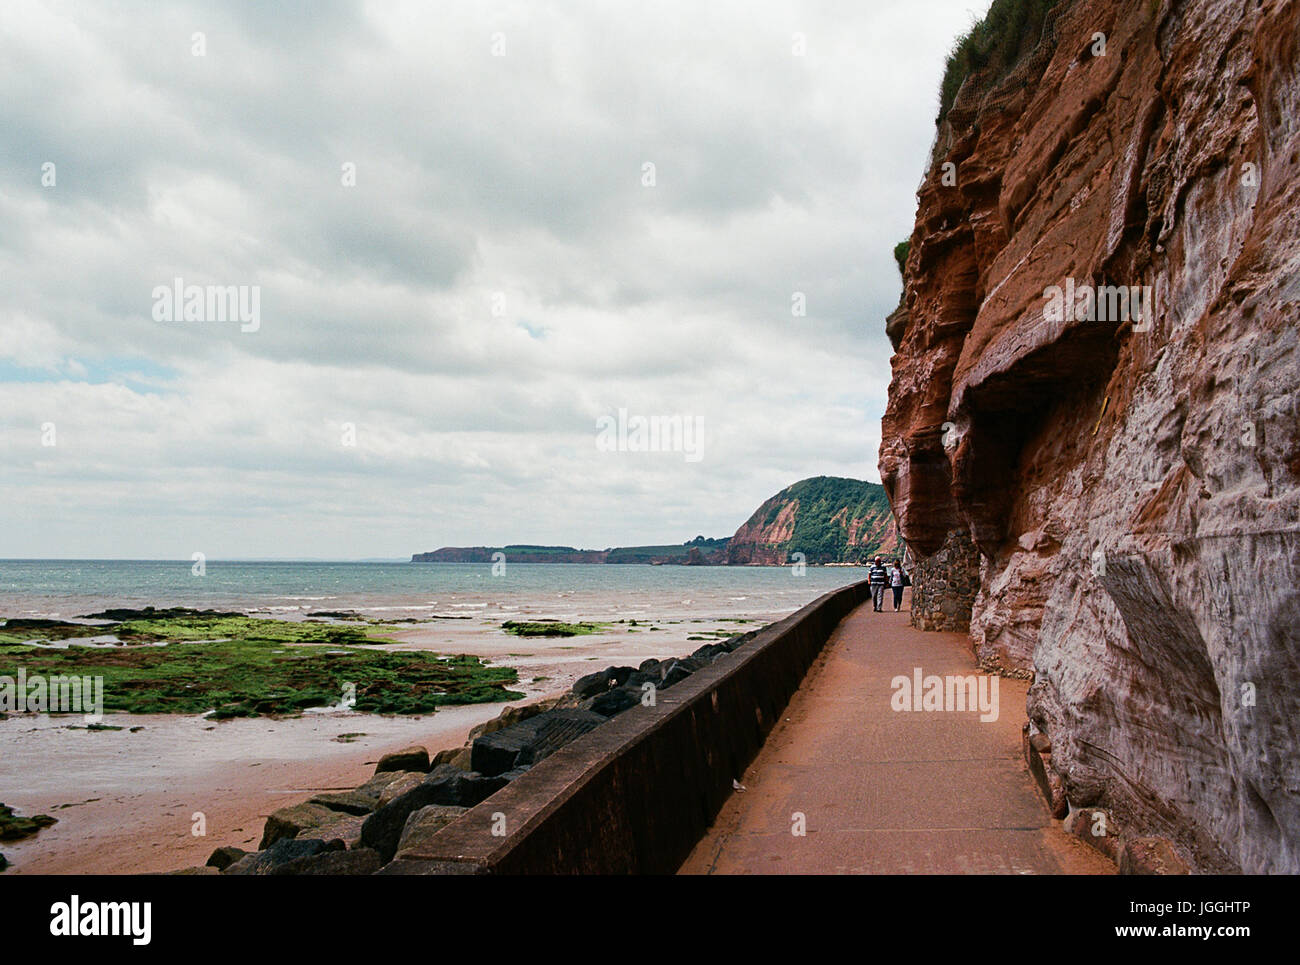 The coastal path along the shoreline at Sidmouth, Devon UK, looking west Stock Photo